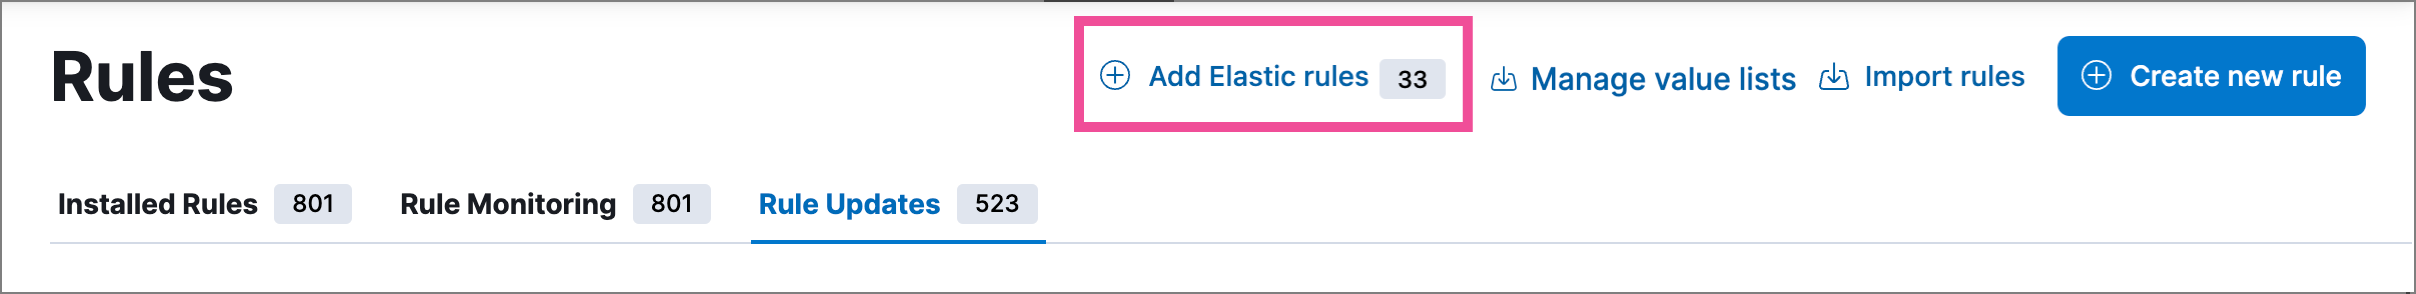 The Add Elastic Rules page